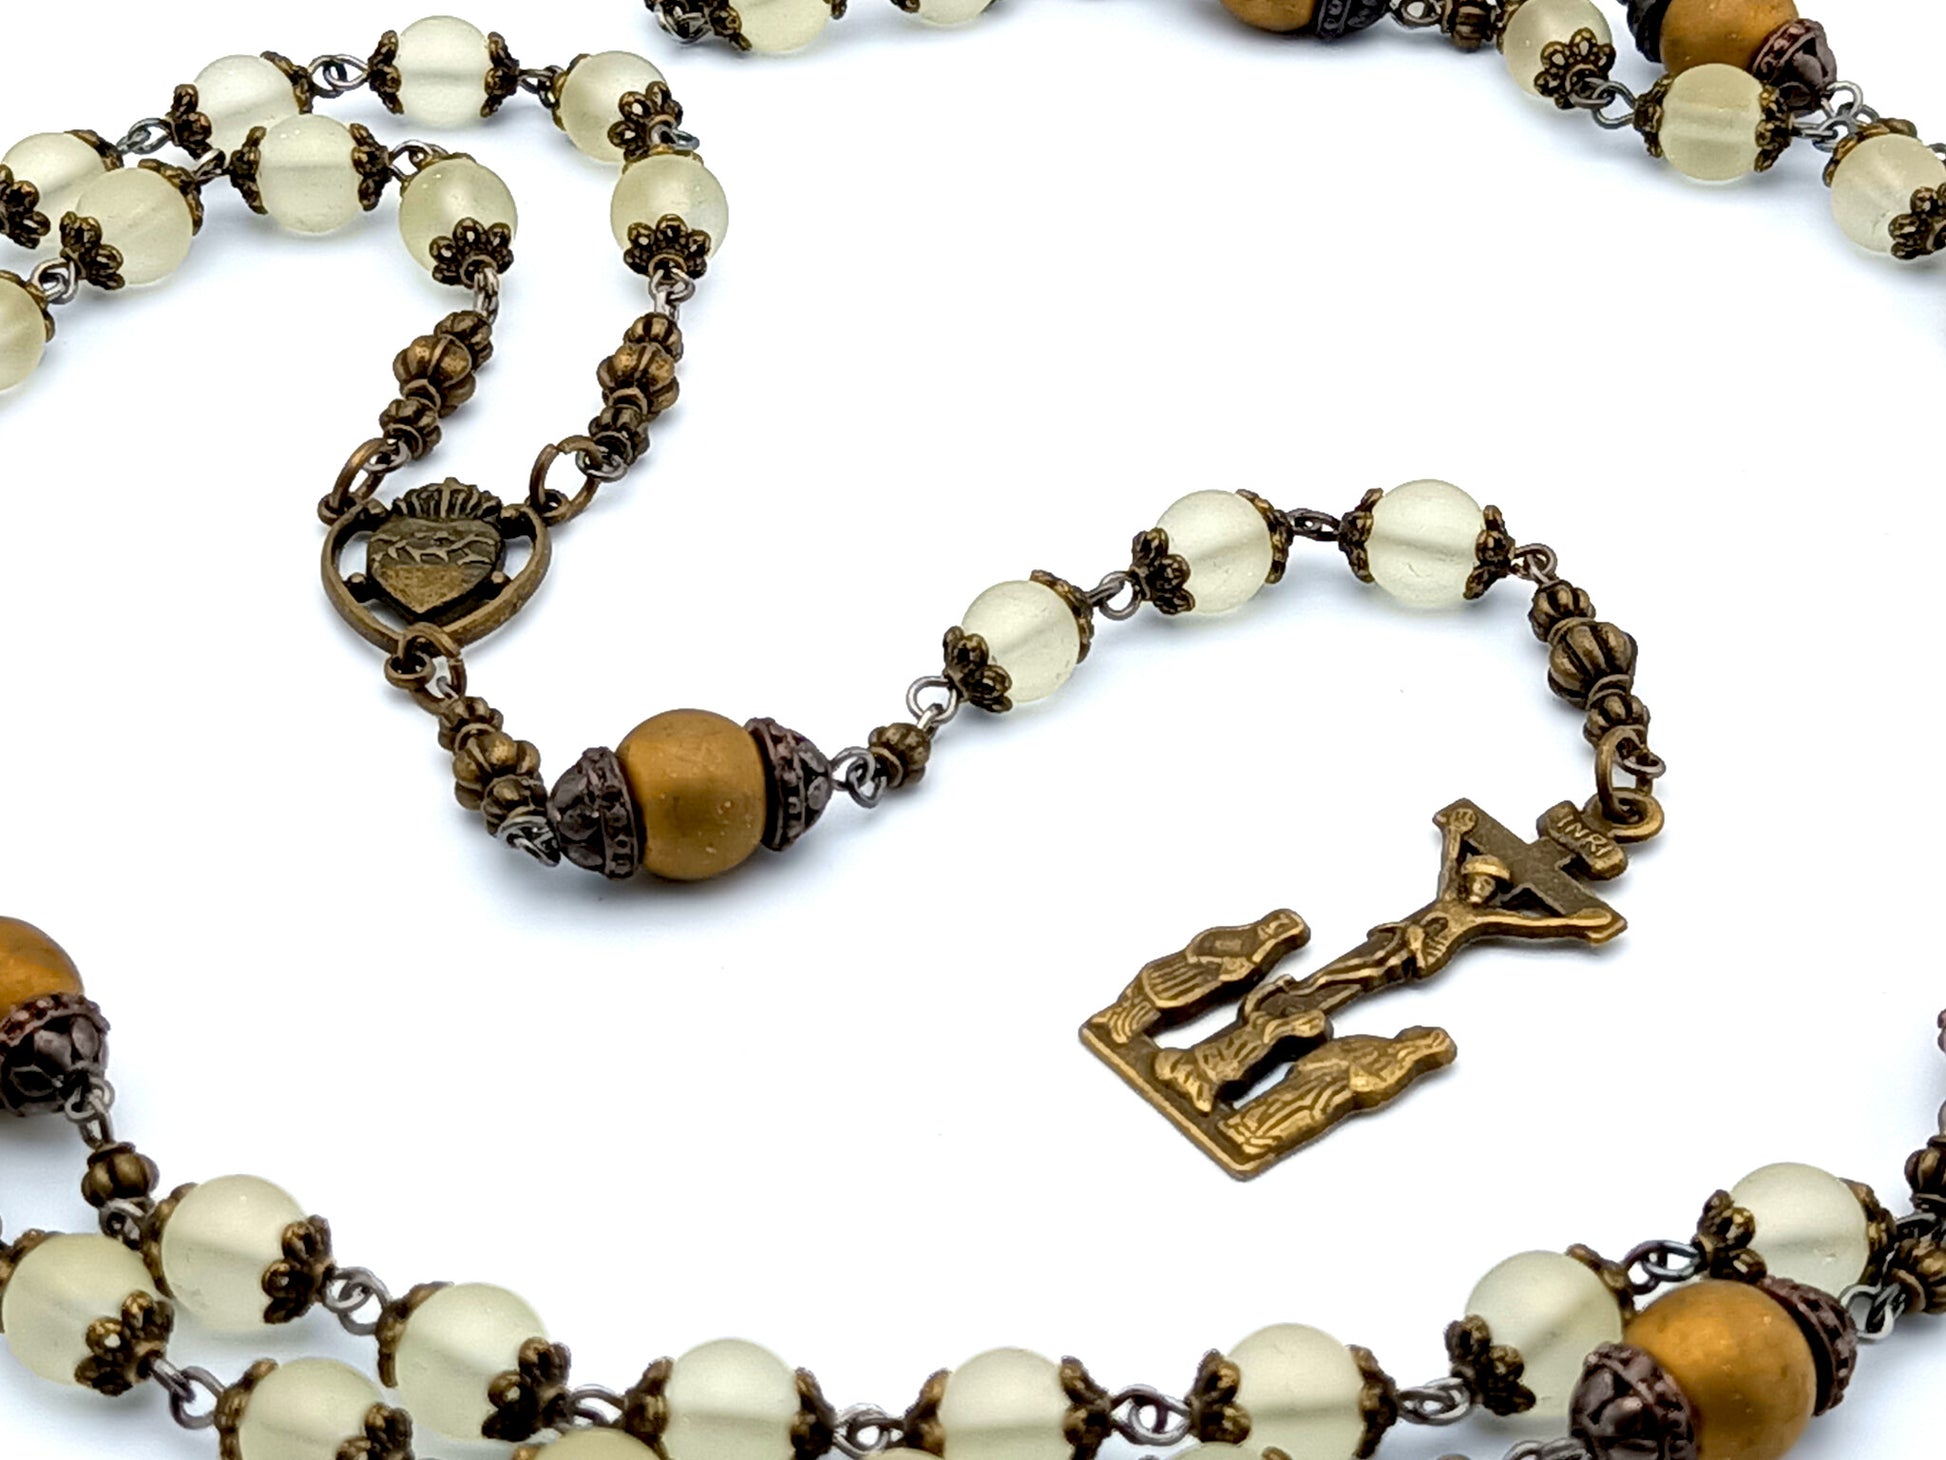 Our Lady of Sorrows unique rosary beads dolor rosary with bronze and opal glass beads with two Marys crucifix and Sacred Heart centre medal.